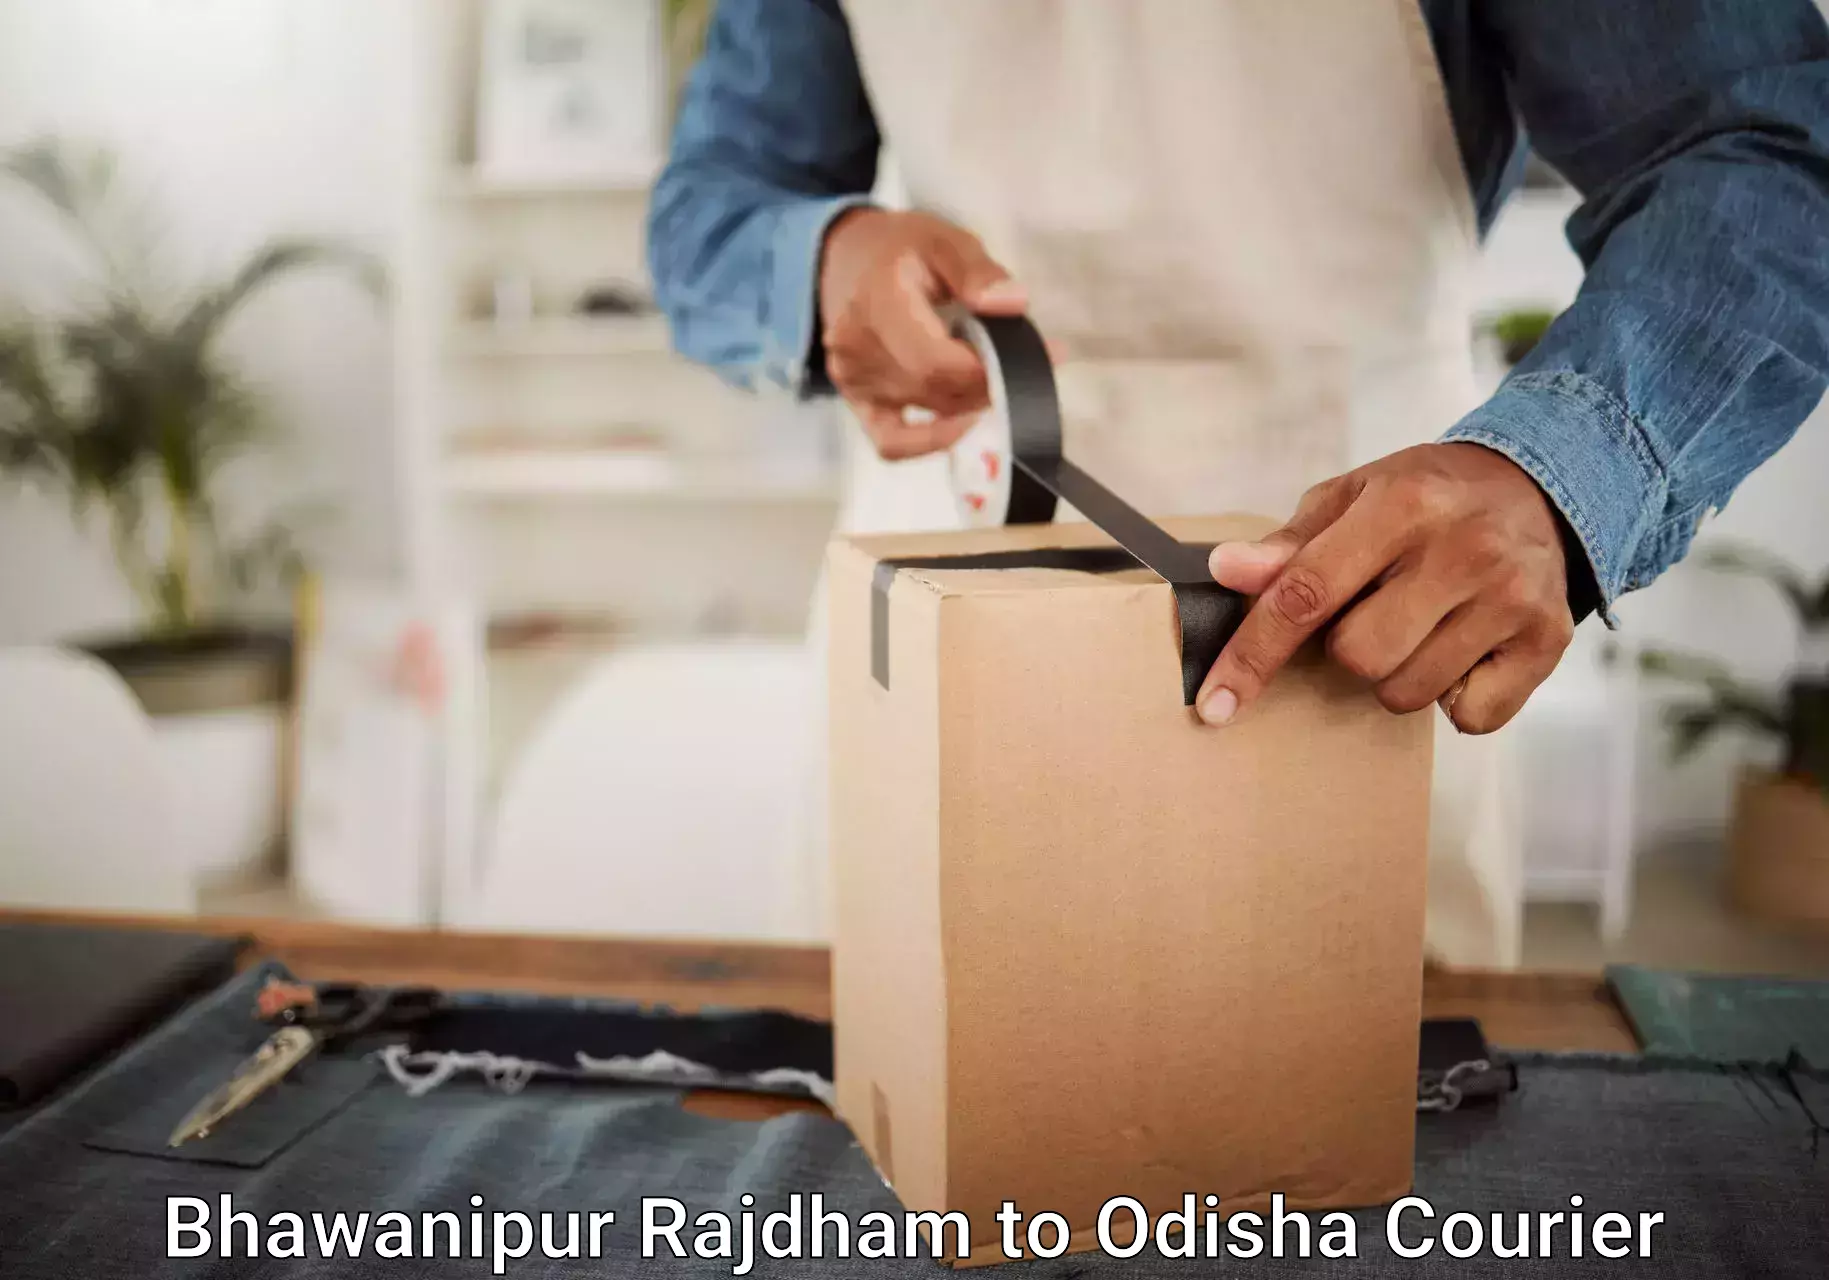 Reliable luggage courier Bhawanipur Rajdham to Behrampur